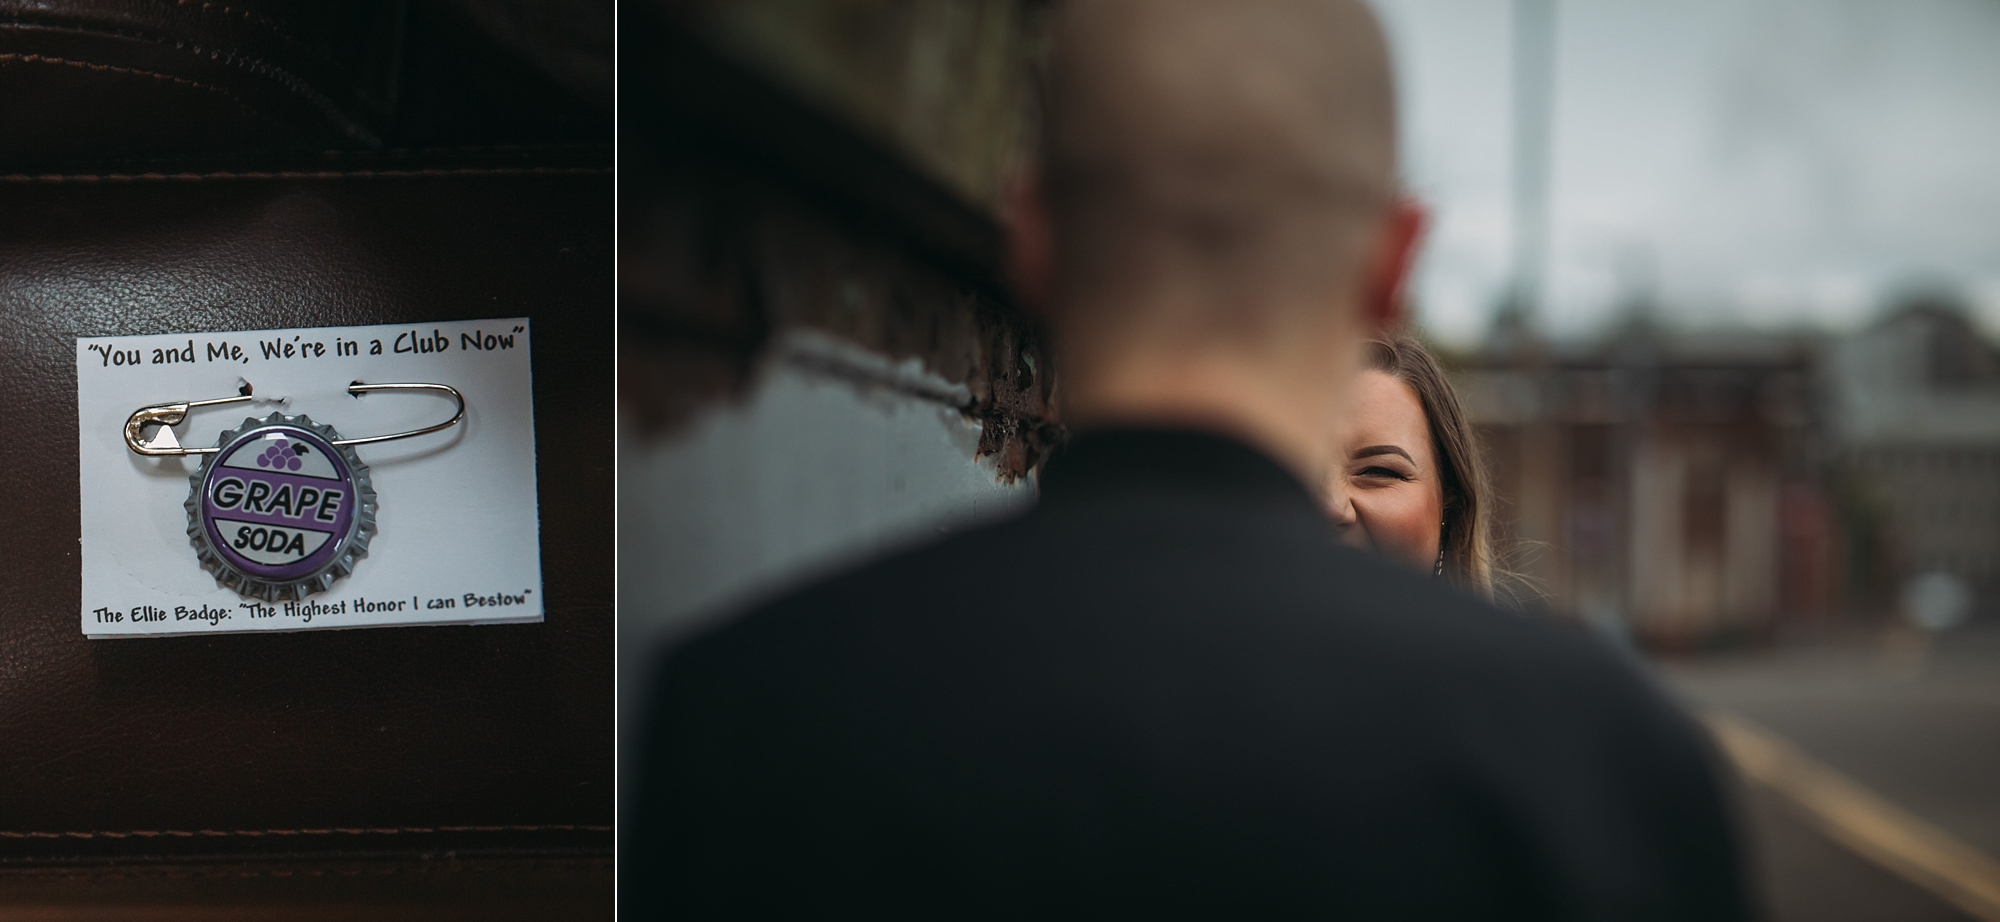 best wedding photographs - grape oda badge from 'Up' and an image of an engaged couple in Glasgow